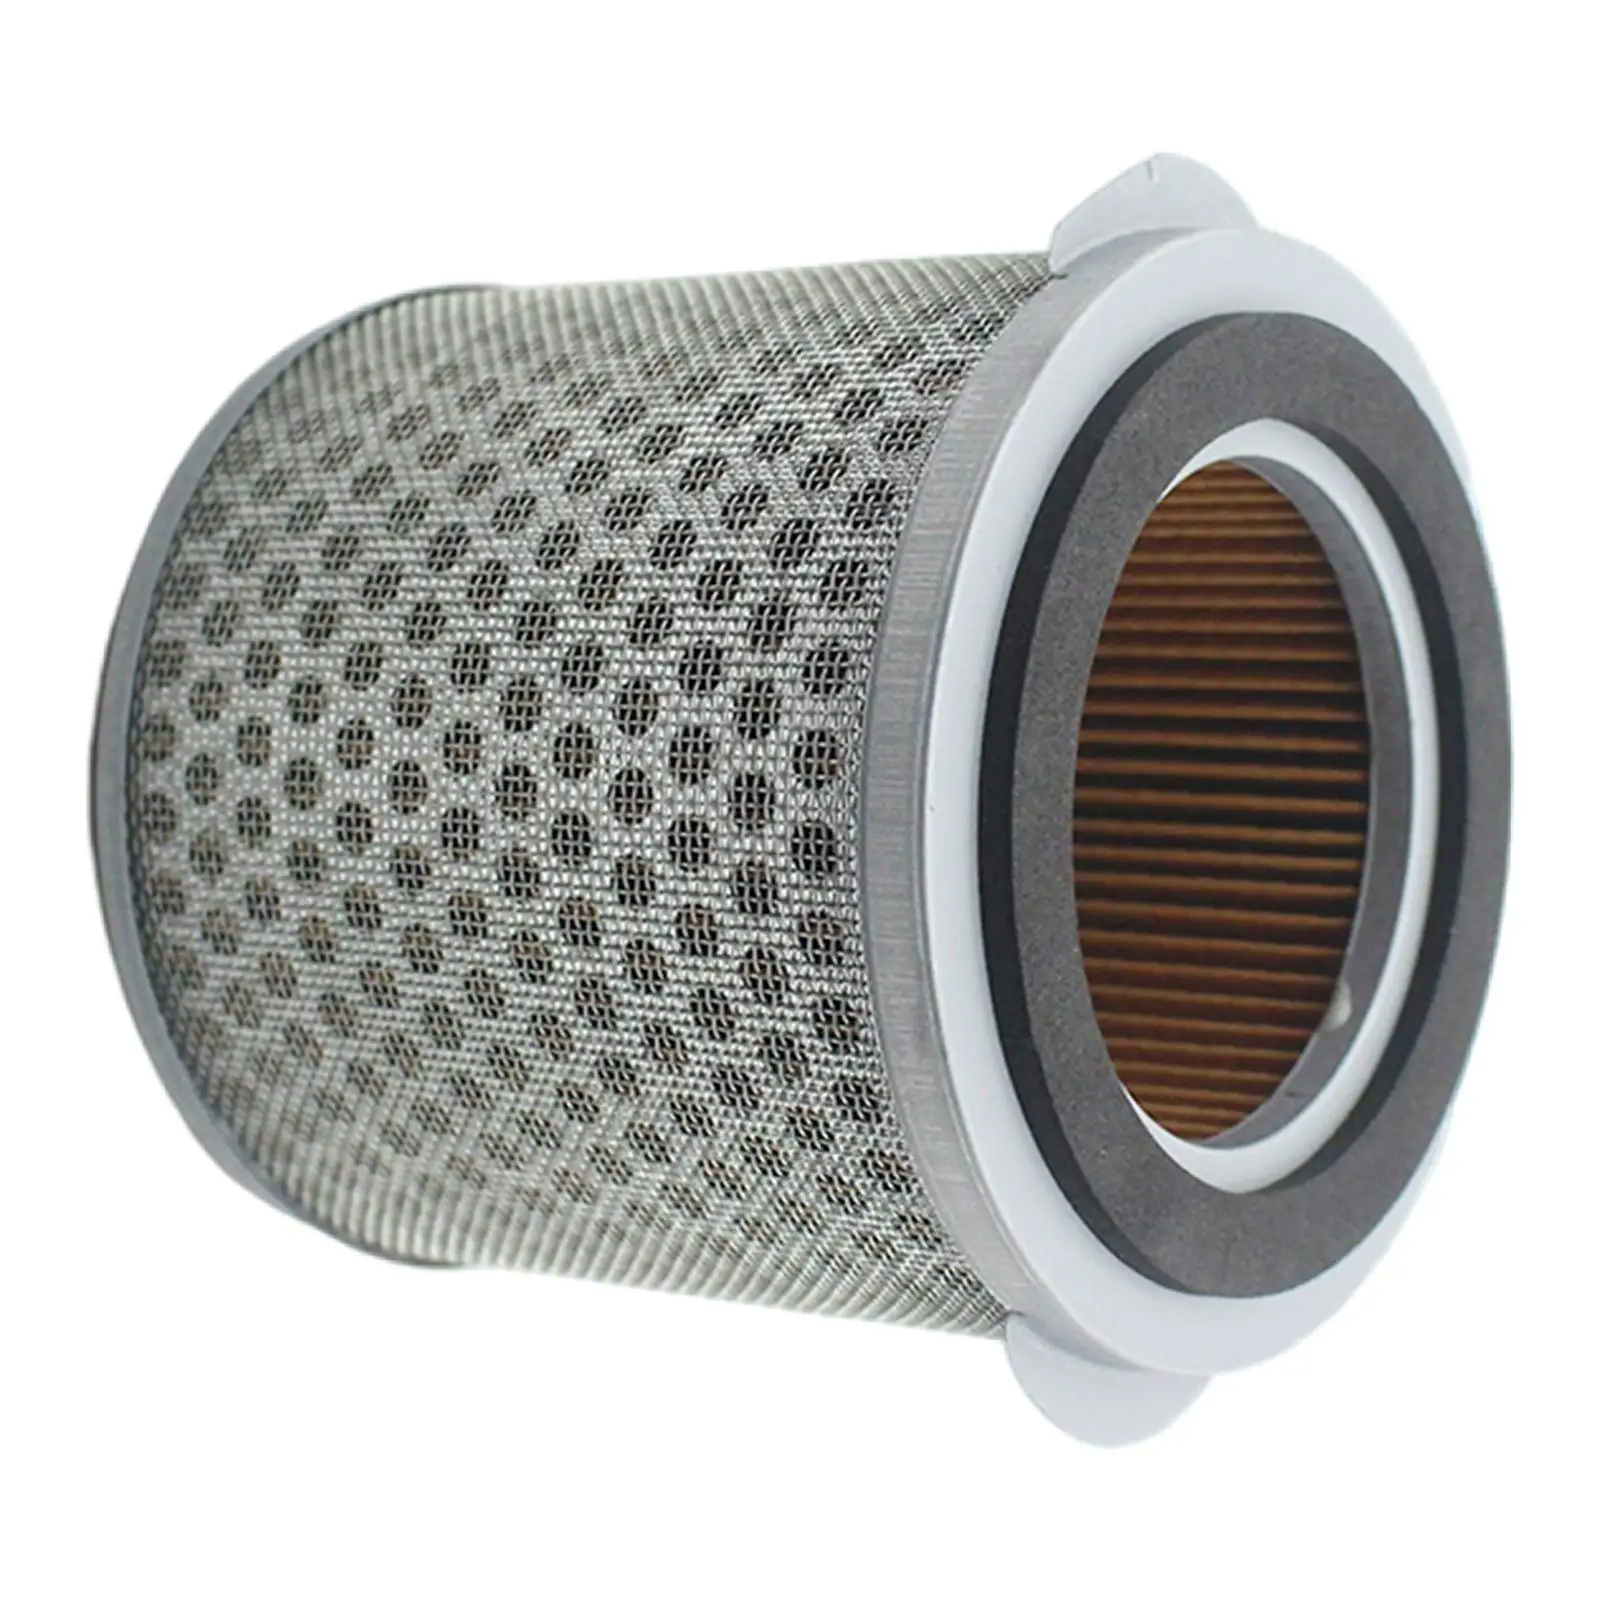 Air Filters Replacement, Motorbike Motorcycle Car Supplies Accessories Out Filter Intake Cleaner, Fits  300  300 ,17211-Kwt-900